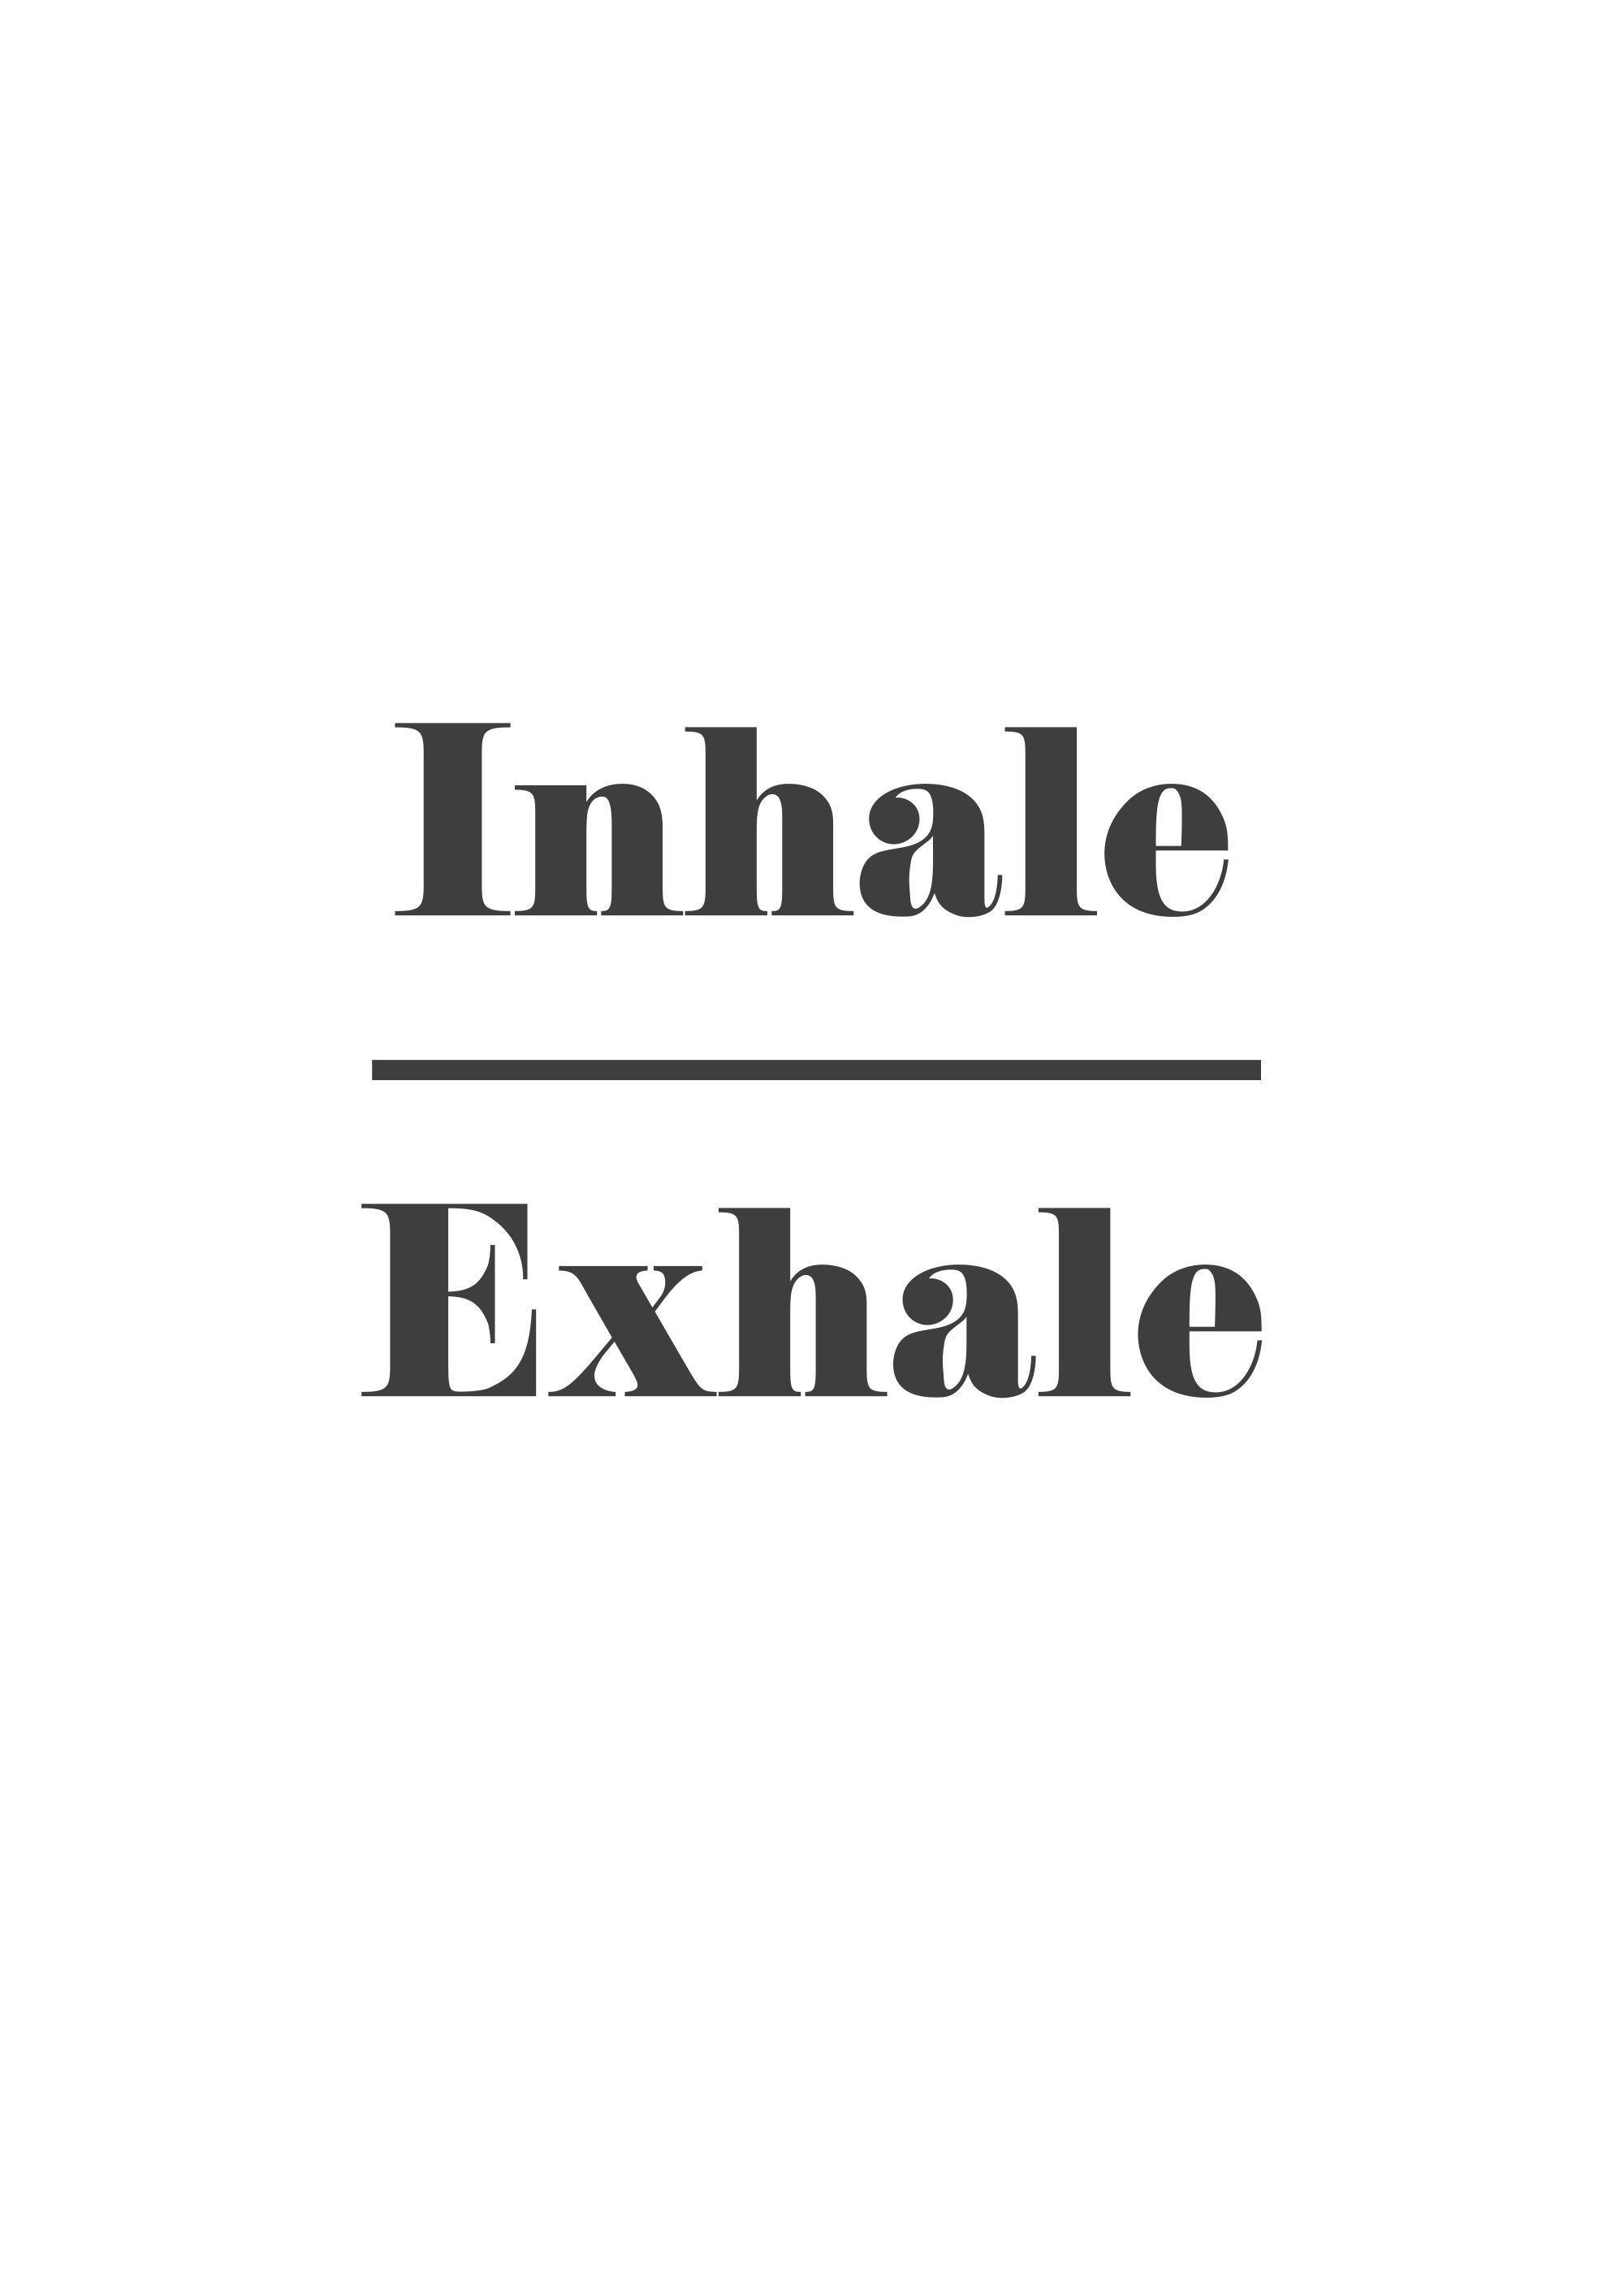 Inhale Logo - inhale exhale | Big Truths in B&W | Company logo, Law of attraction ...